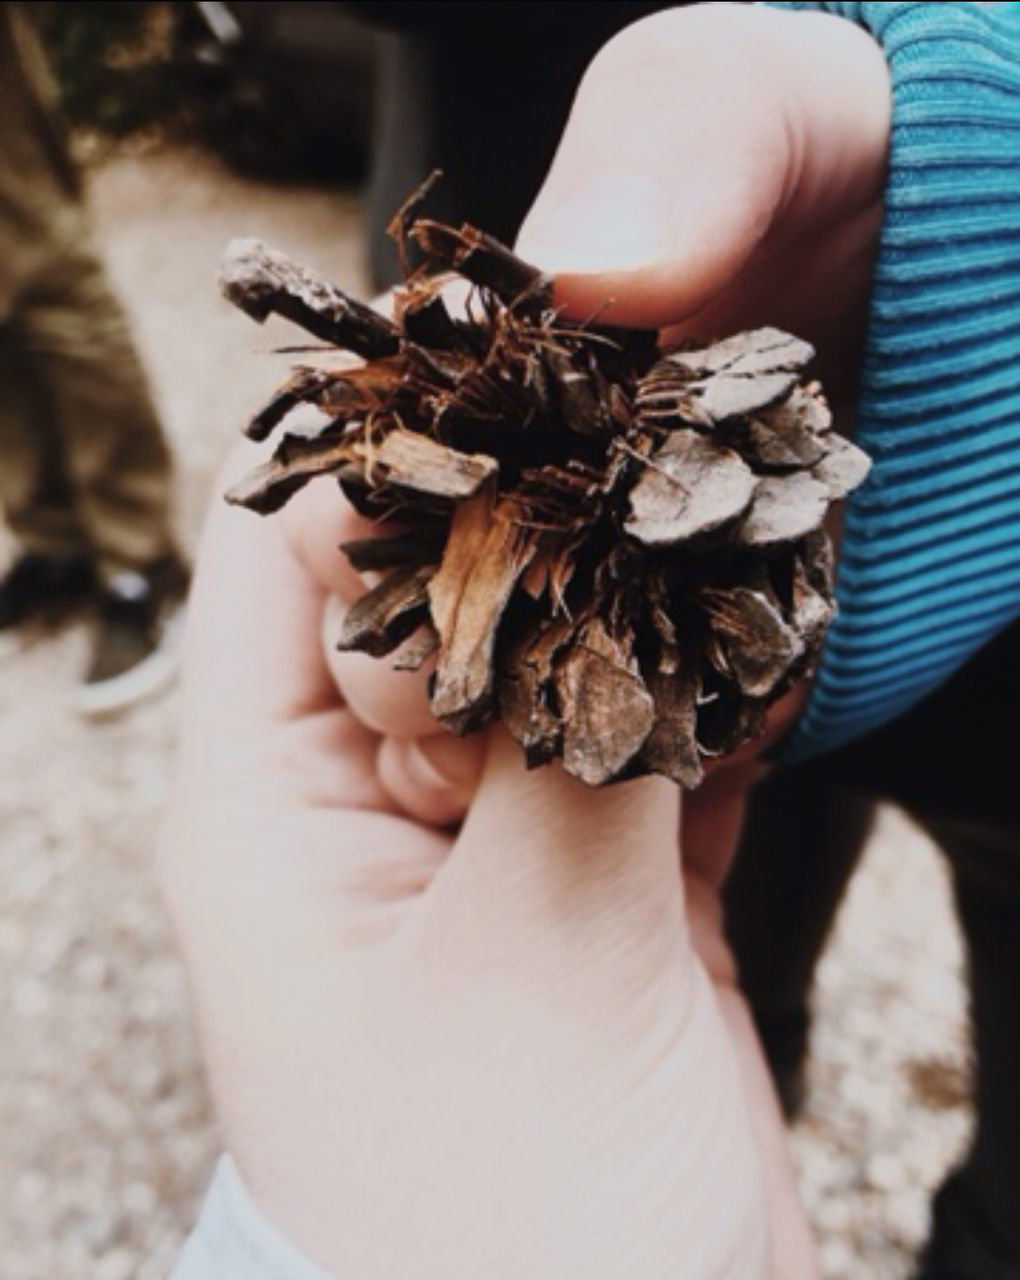 CLOSE-UP OF PERSON HOLDING PINE CONE